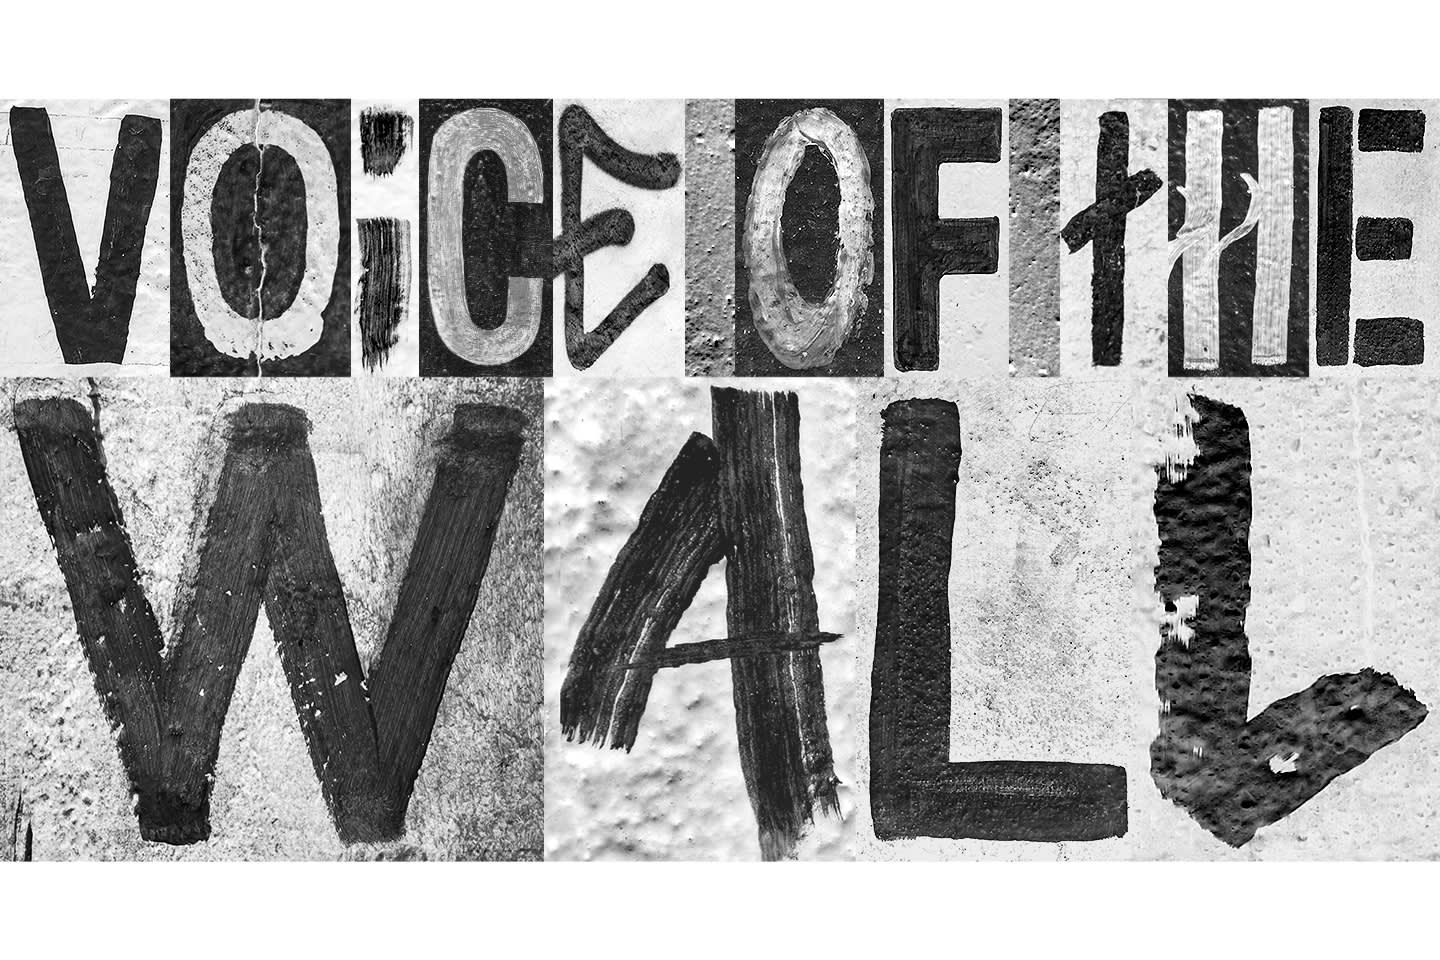 Voice of the Wall imagery